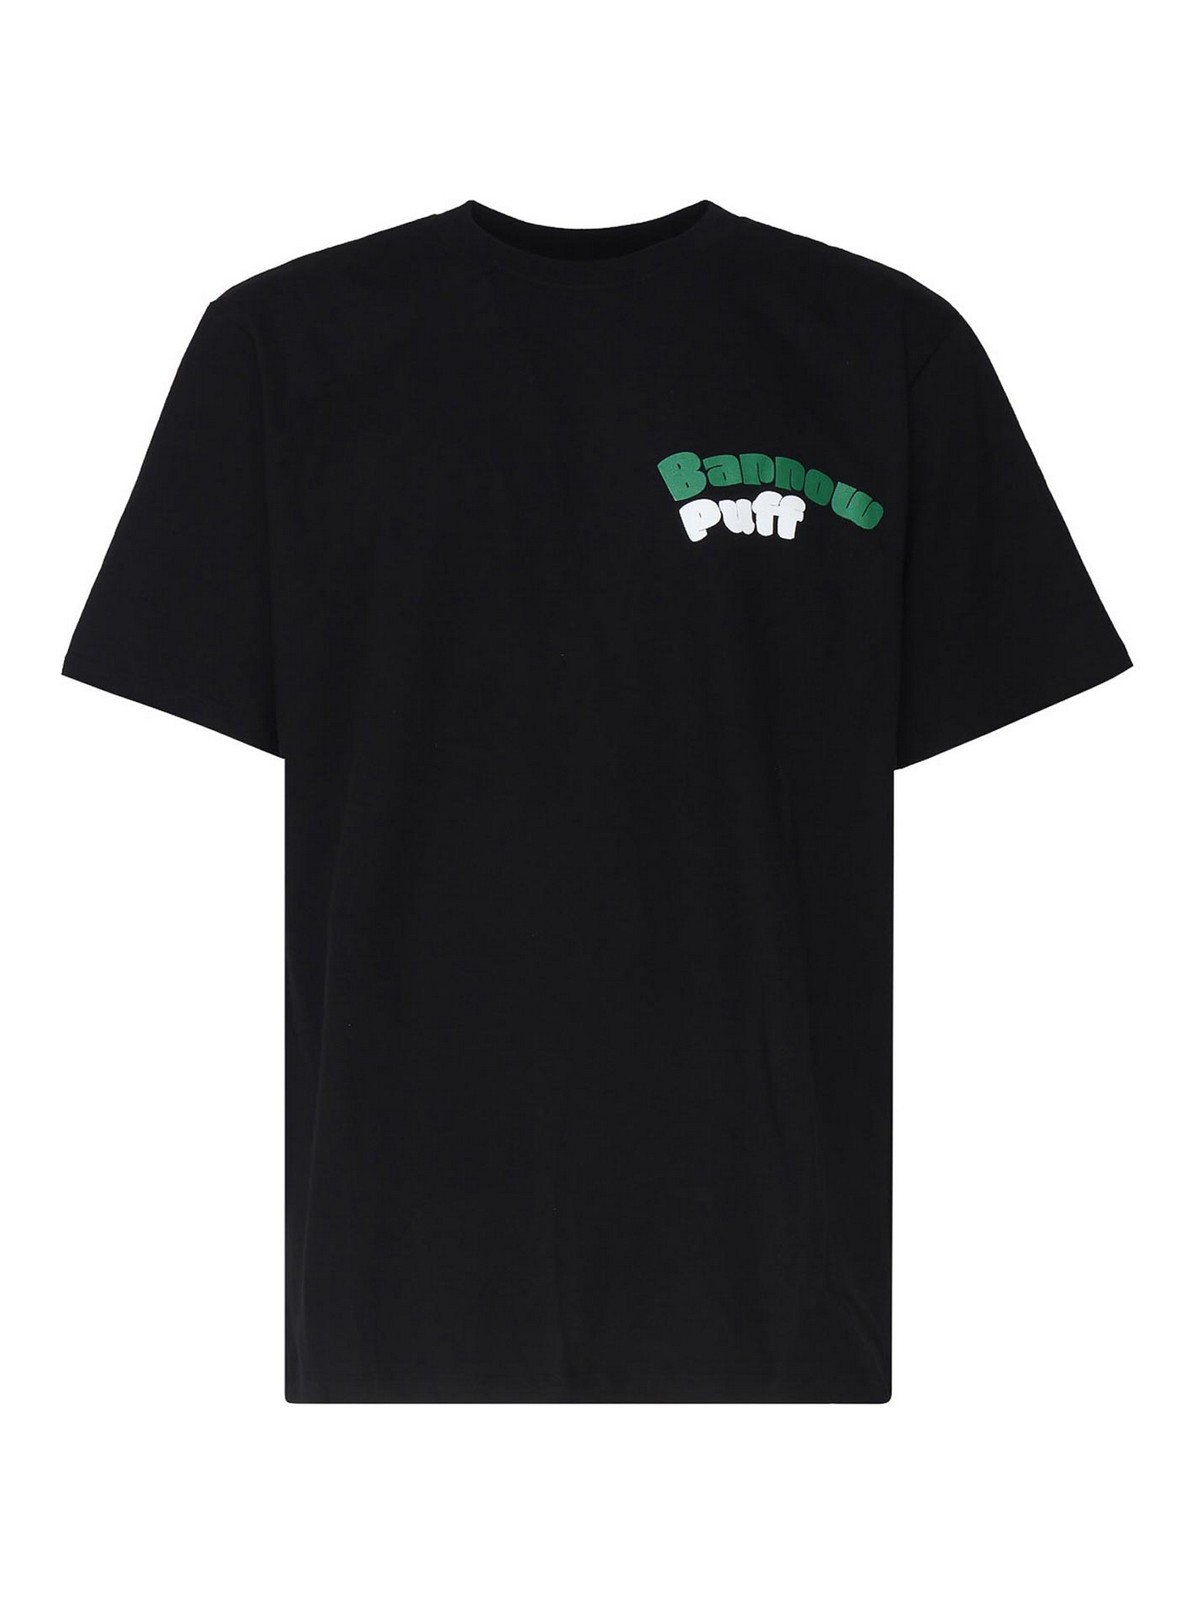 Barrow T-shirt With Print In Black